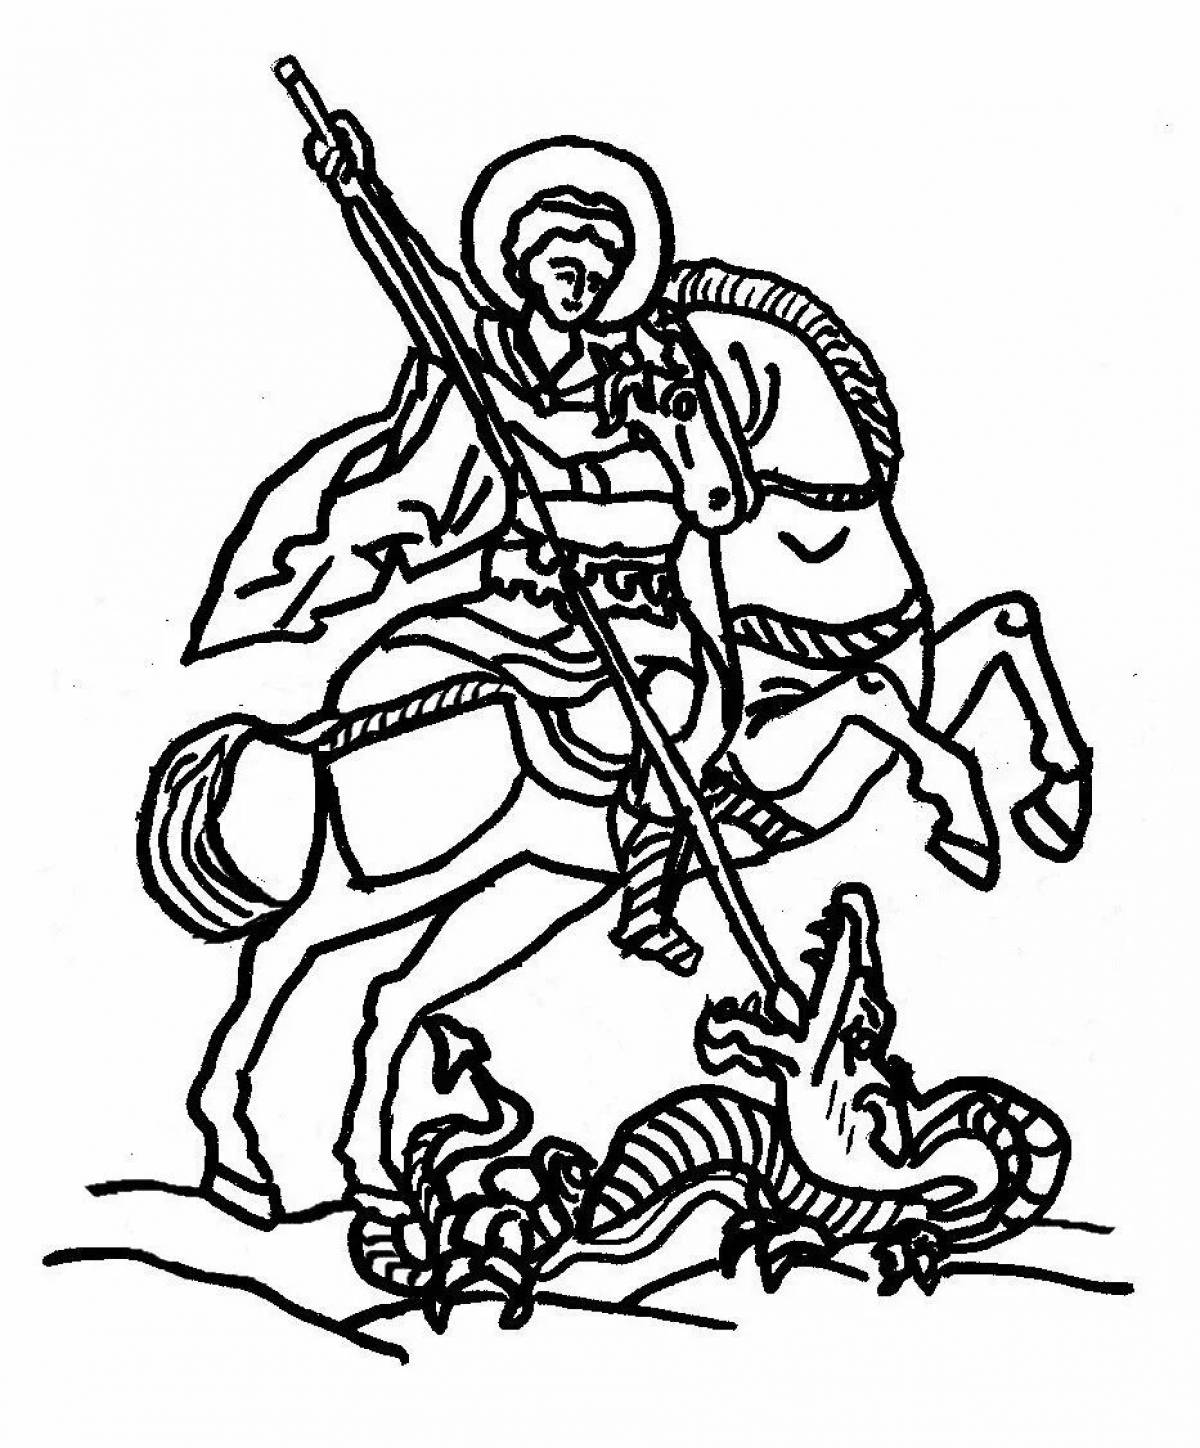 Coloring book appease St. George the victorious